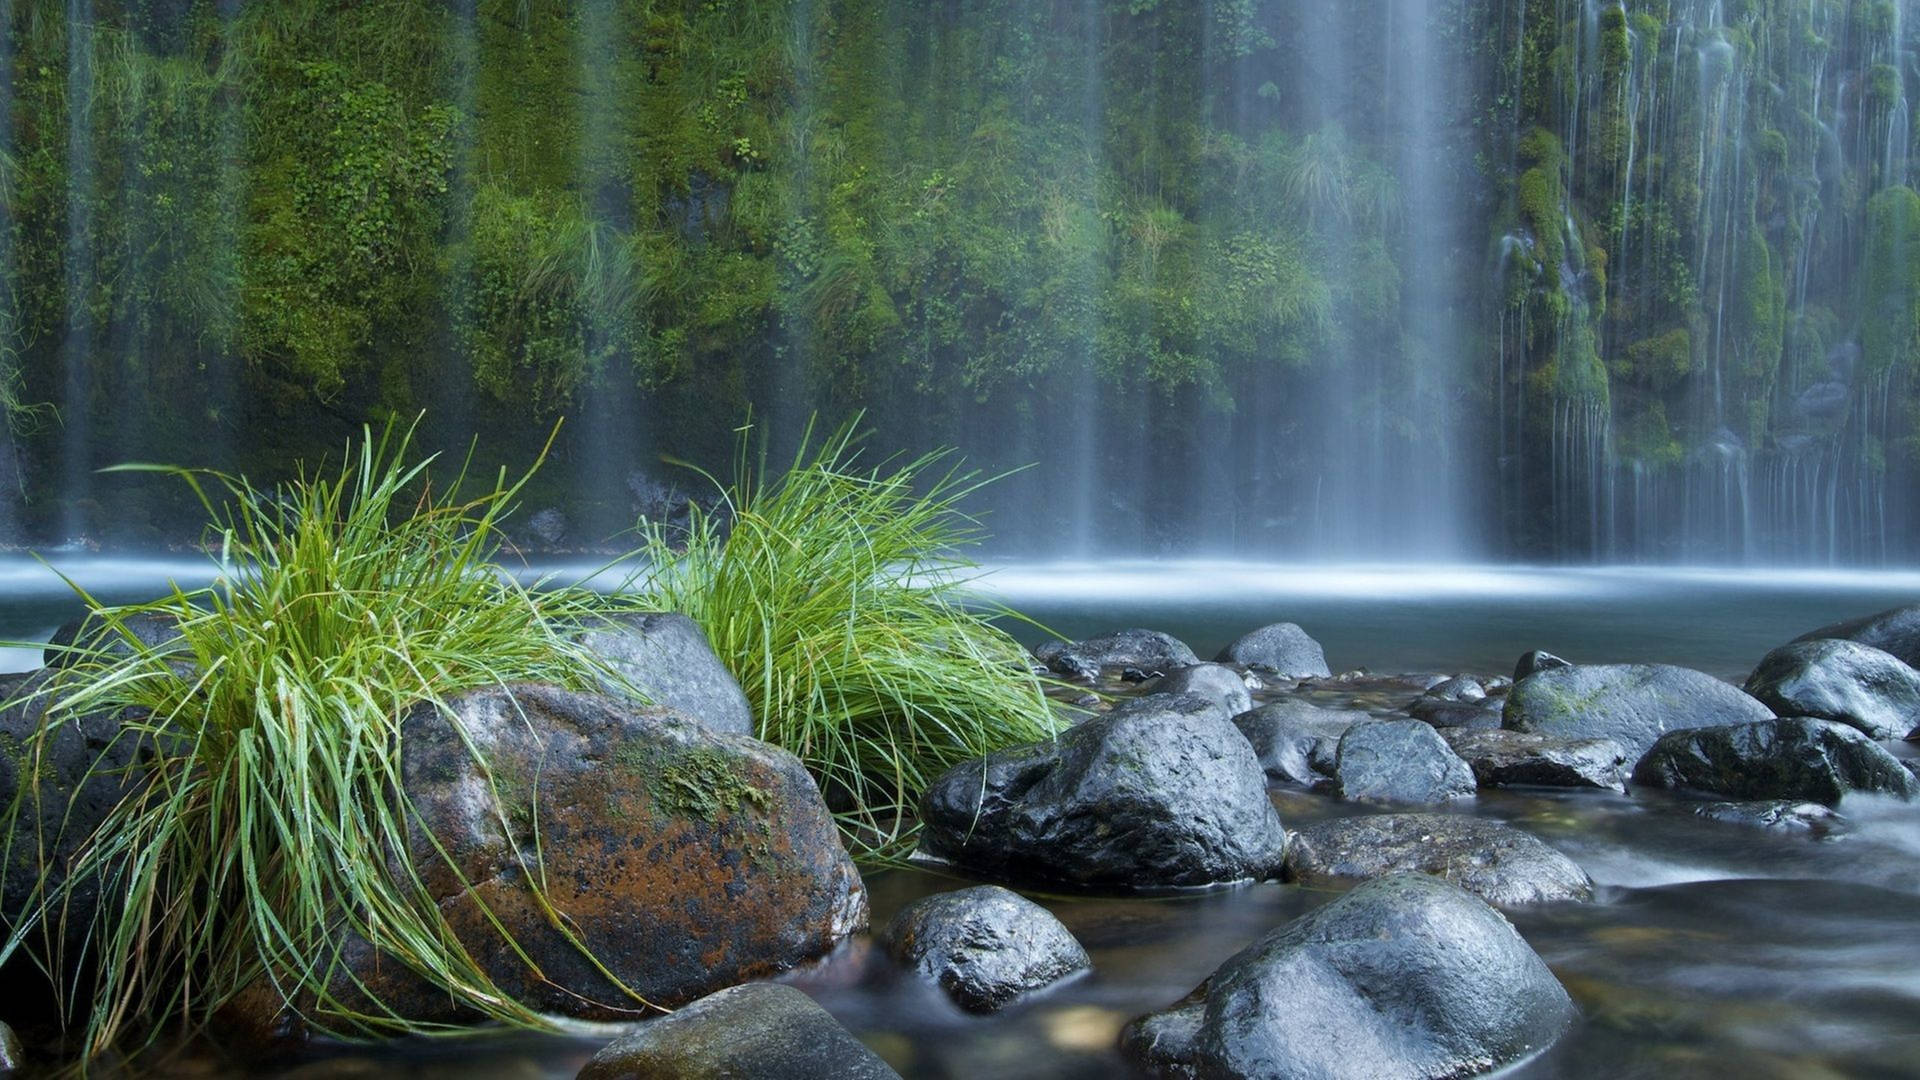 Picturesque Mossbrae Hd Waterfall Background